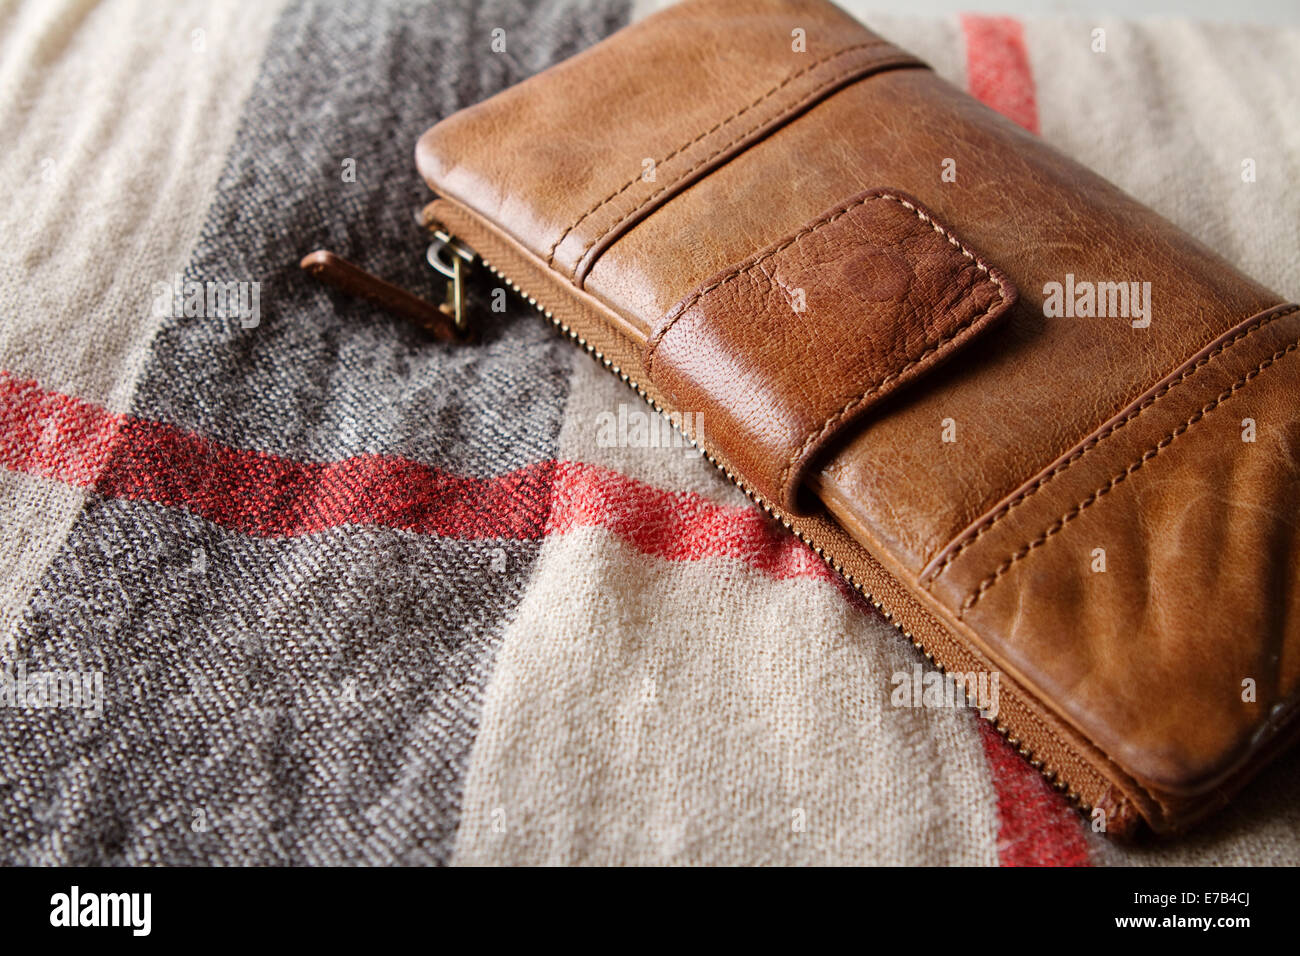 Brown leather purse on a hessian fabric scarf Stock Photo